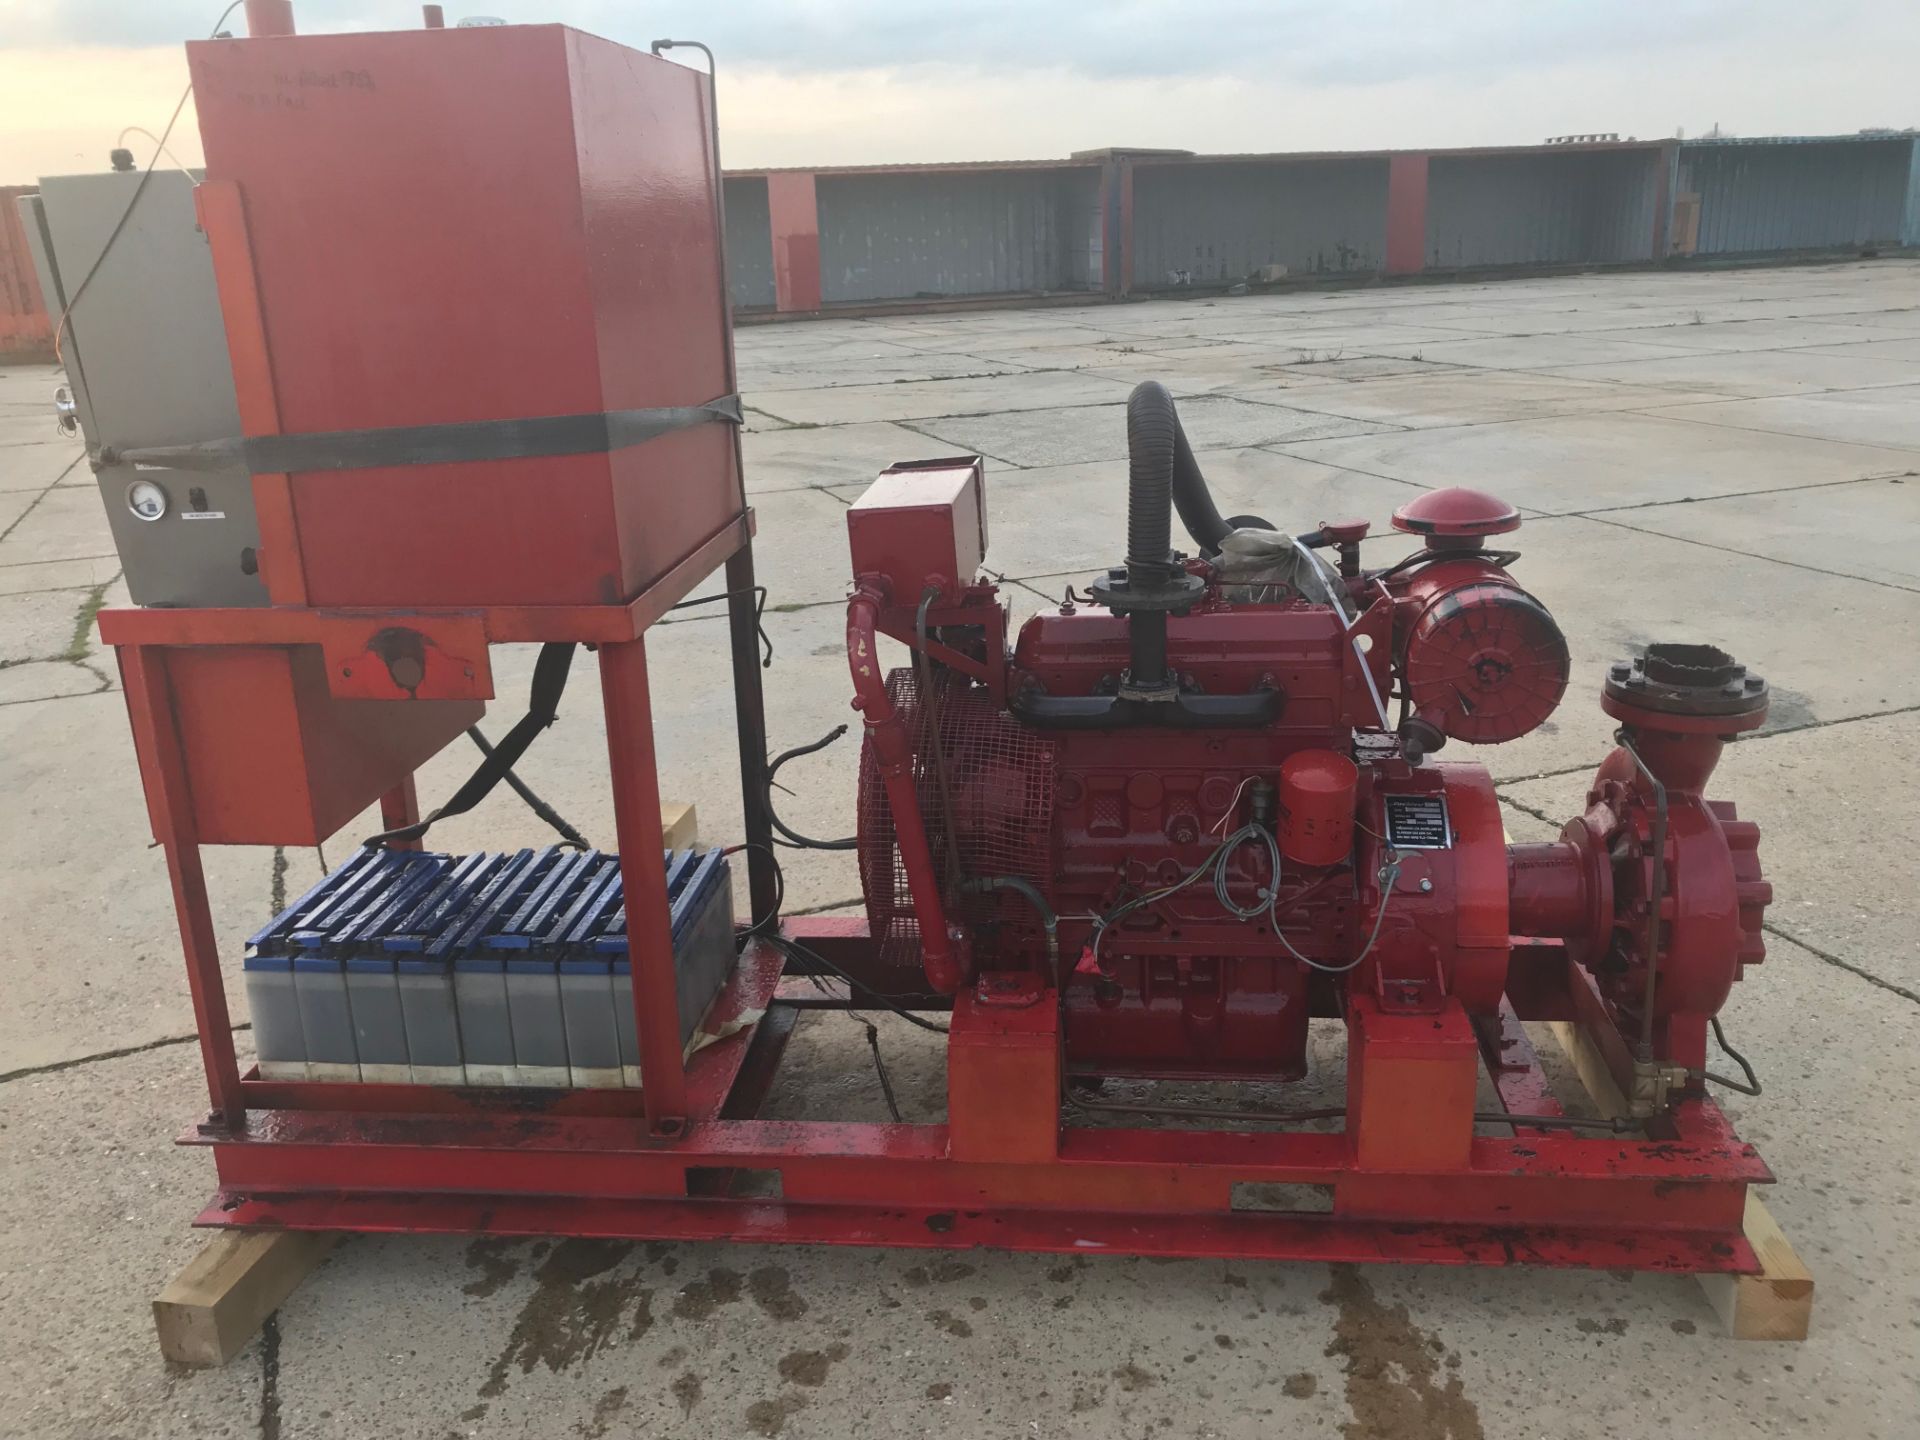 Iveco/Firedriver 85 4 cylinder Diesel Fire Pump